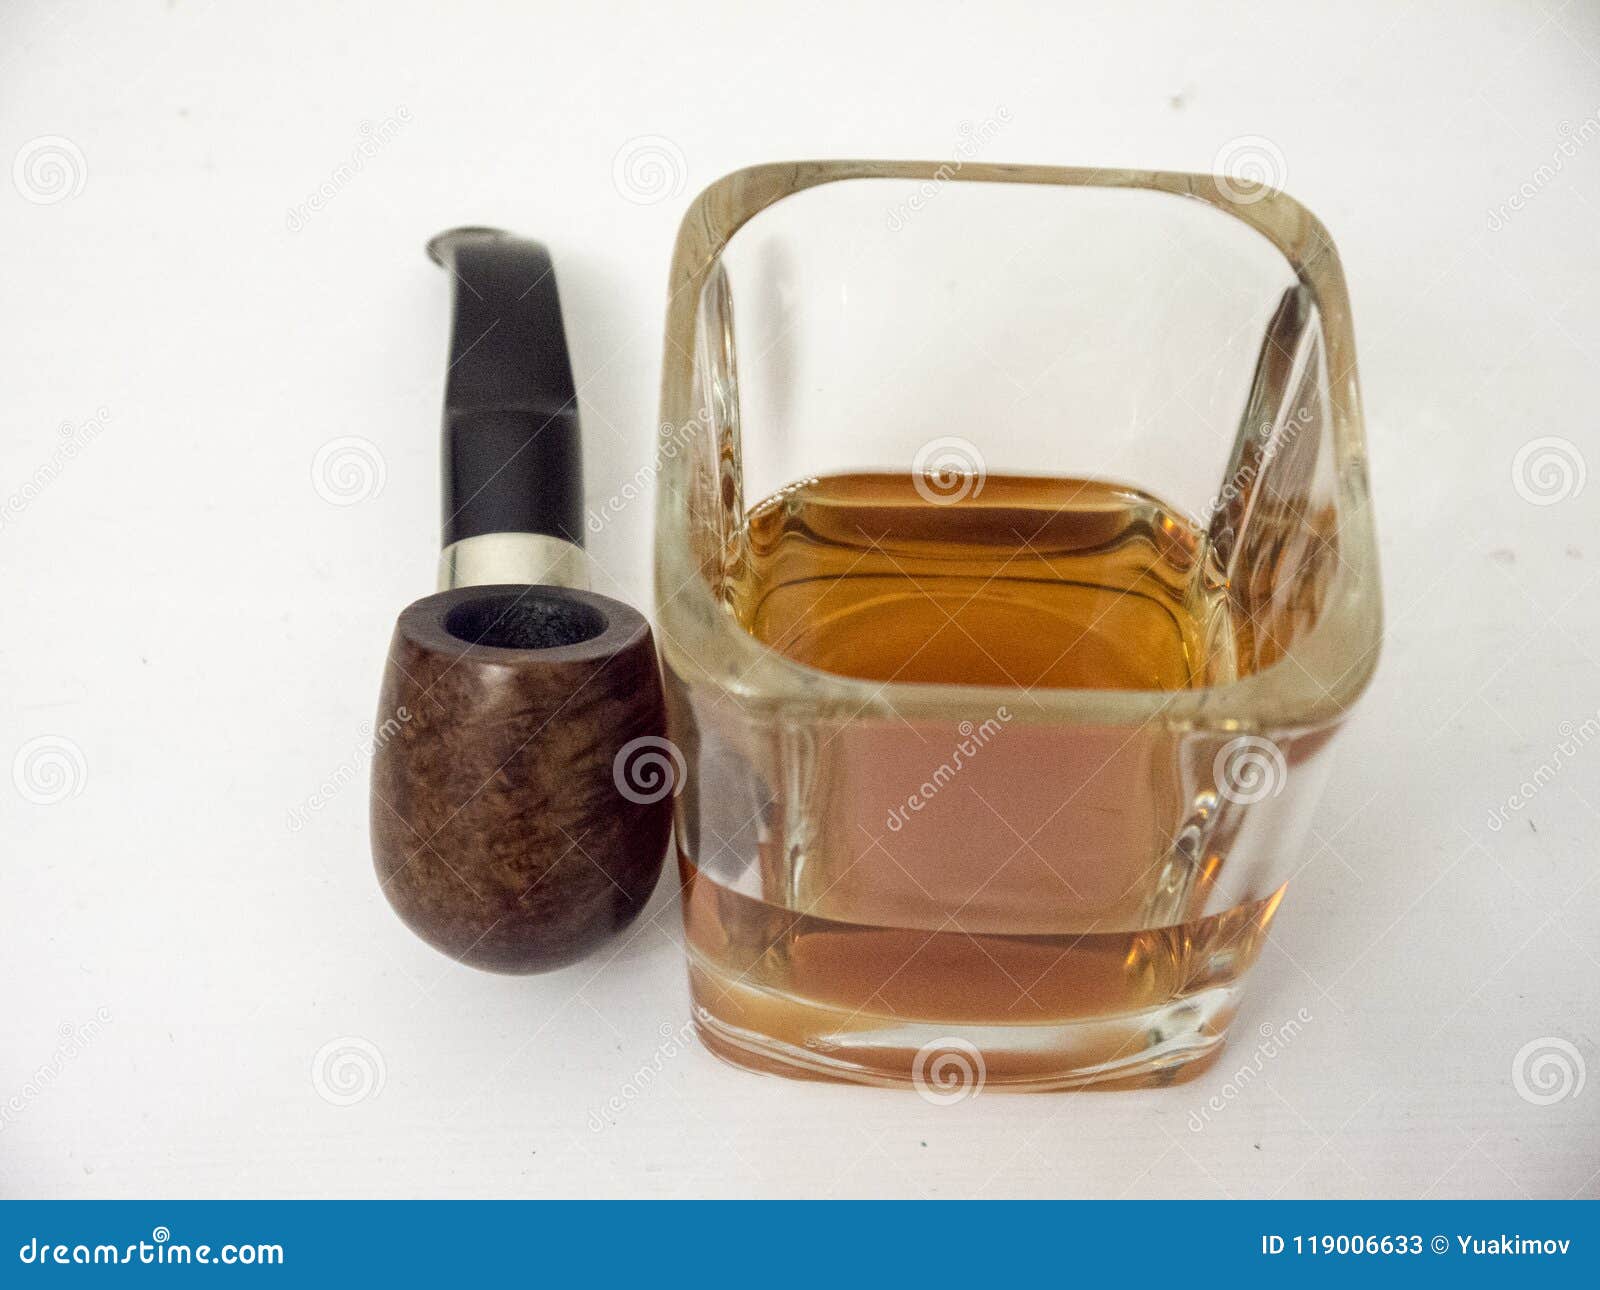 Briar Smoking Pipe Near A Glass Of Whisky Close View With White Stock Image - Image of glass ...